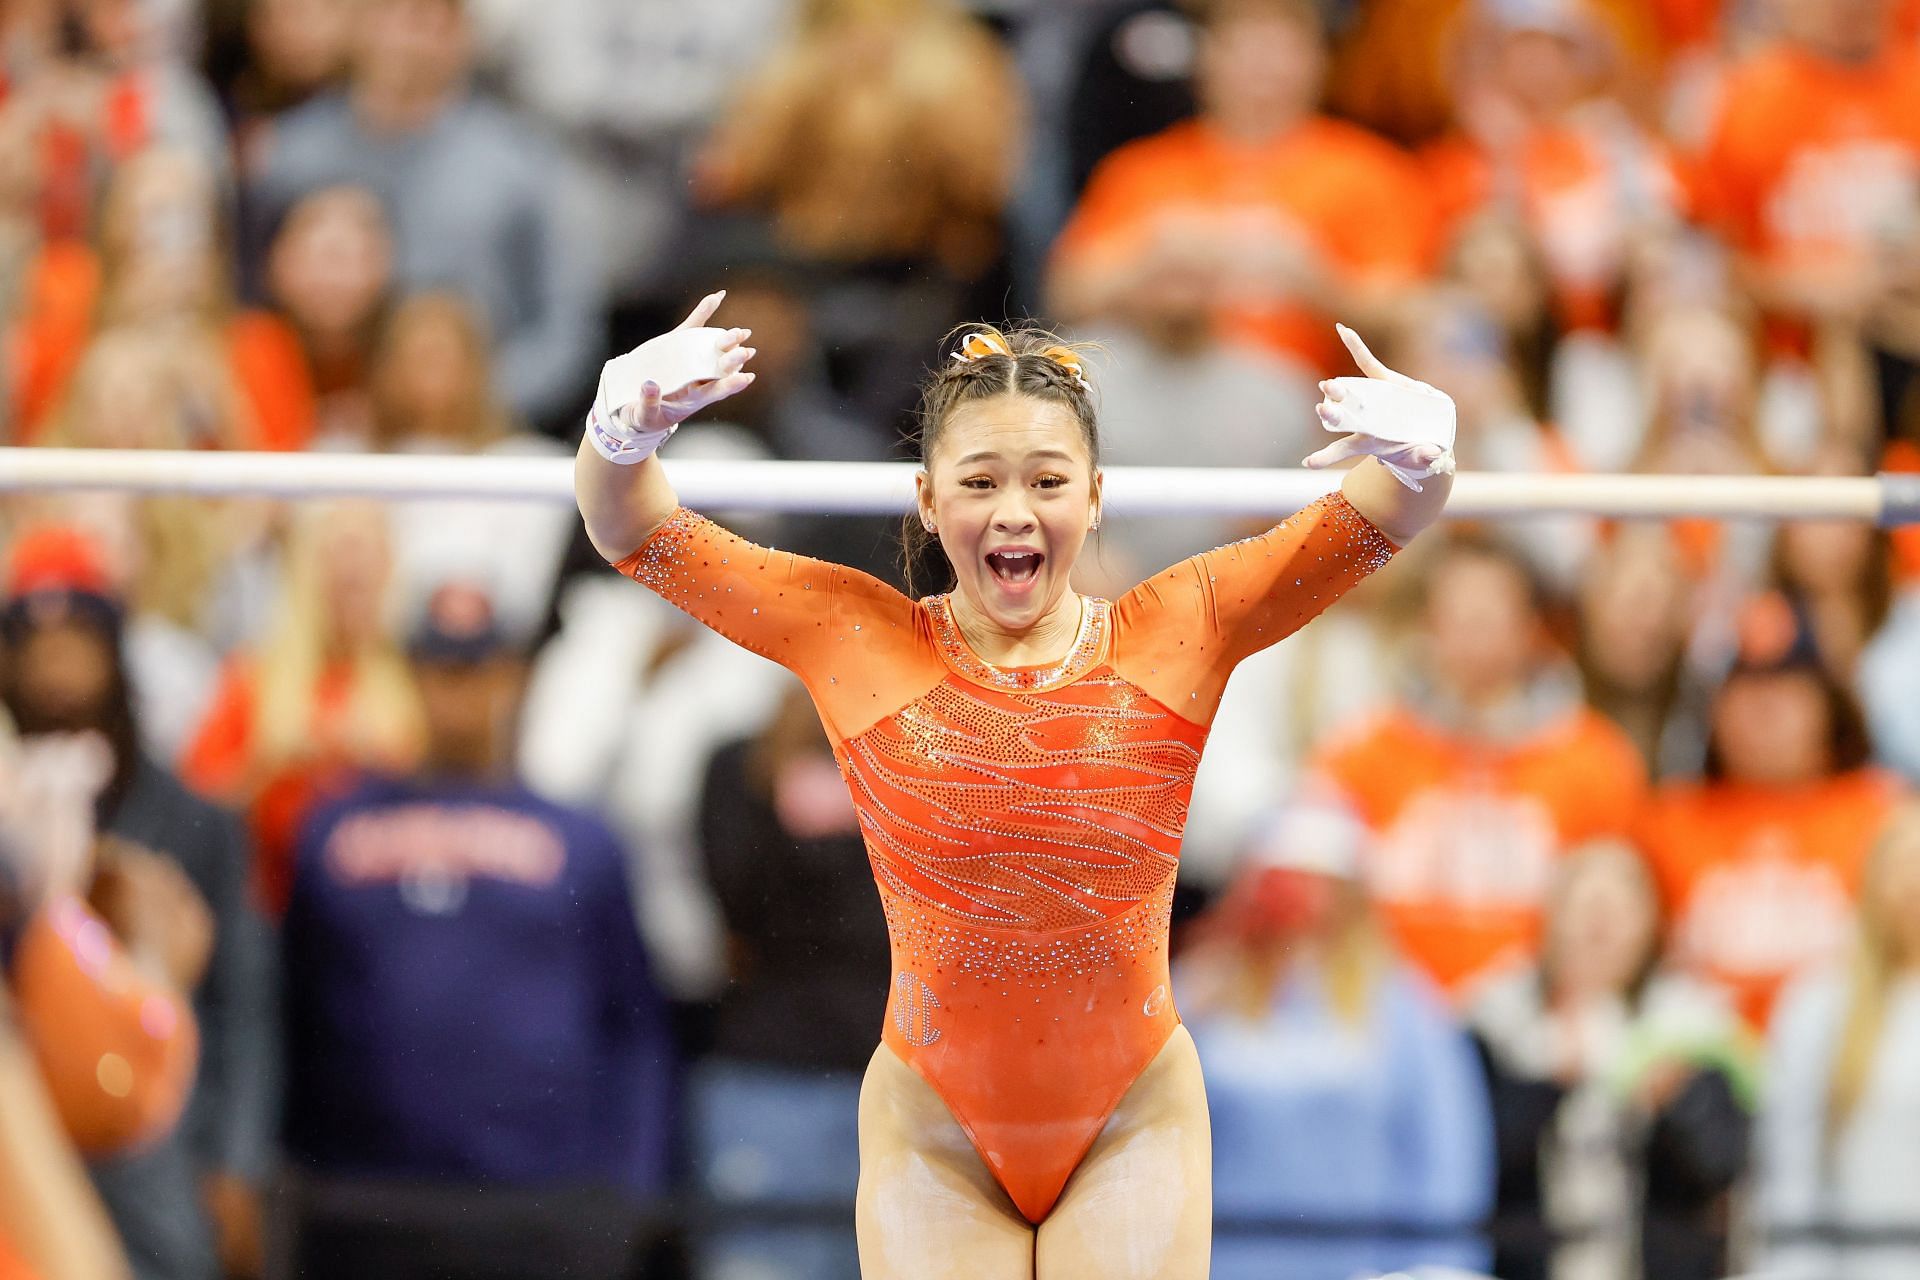 Sunisa Lee of Auburn competes on the uneven bars during a meet against LSU at Neville Arena on February 10, 2023 in Auburn, Alabama. (Photo by Stew Milne/Getty Images)